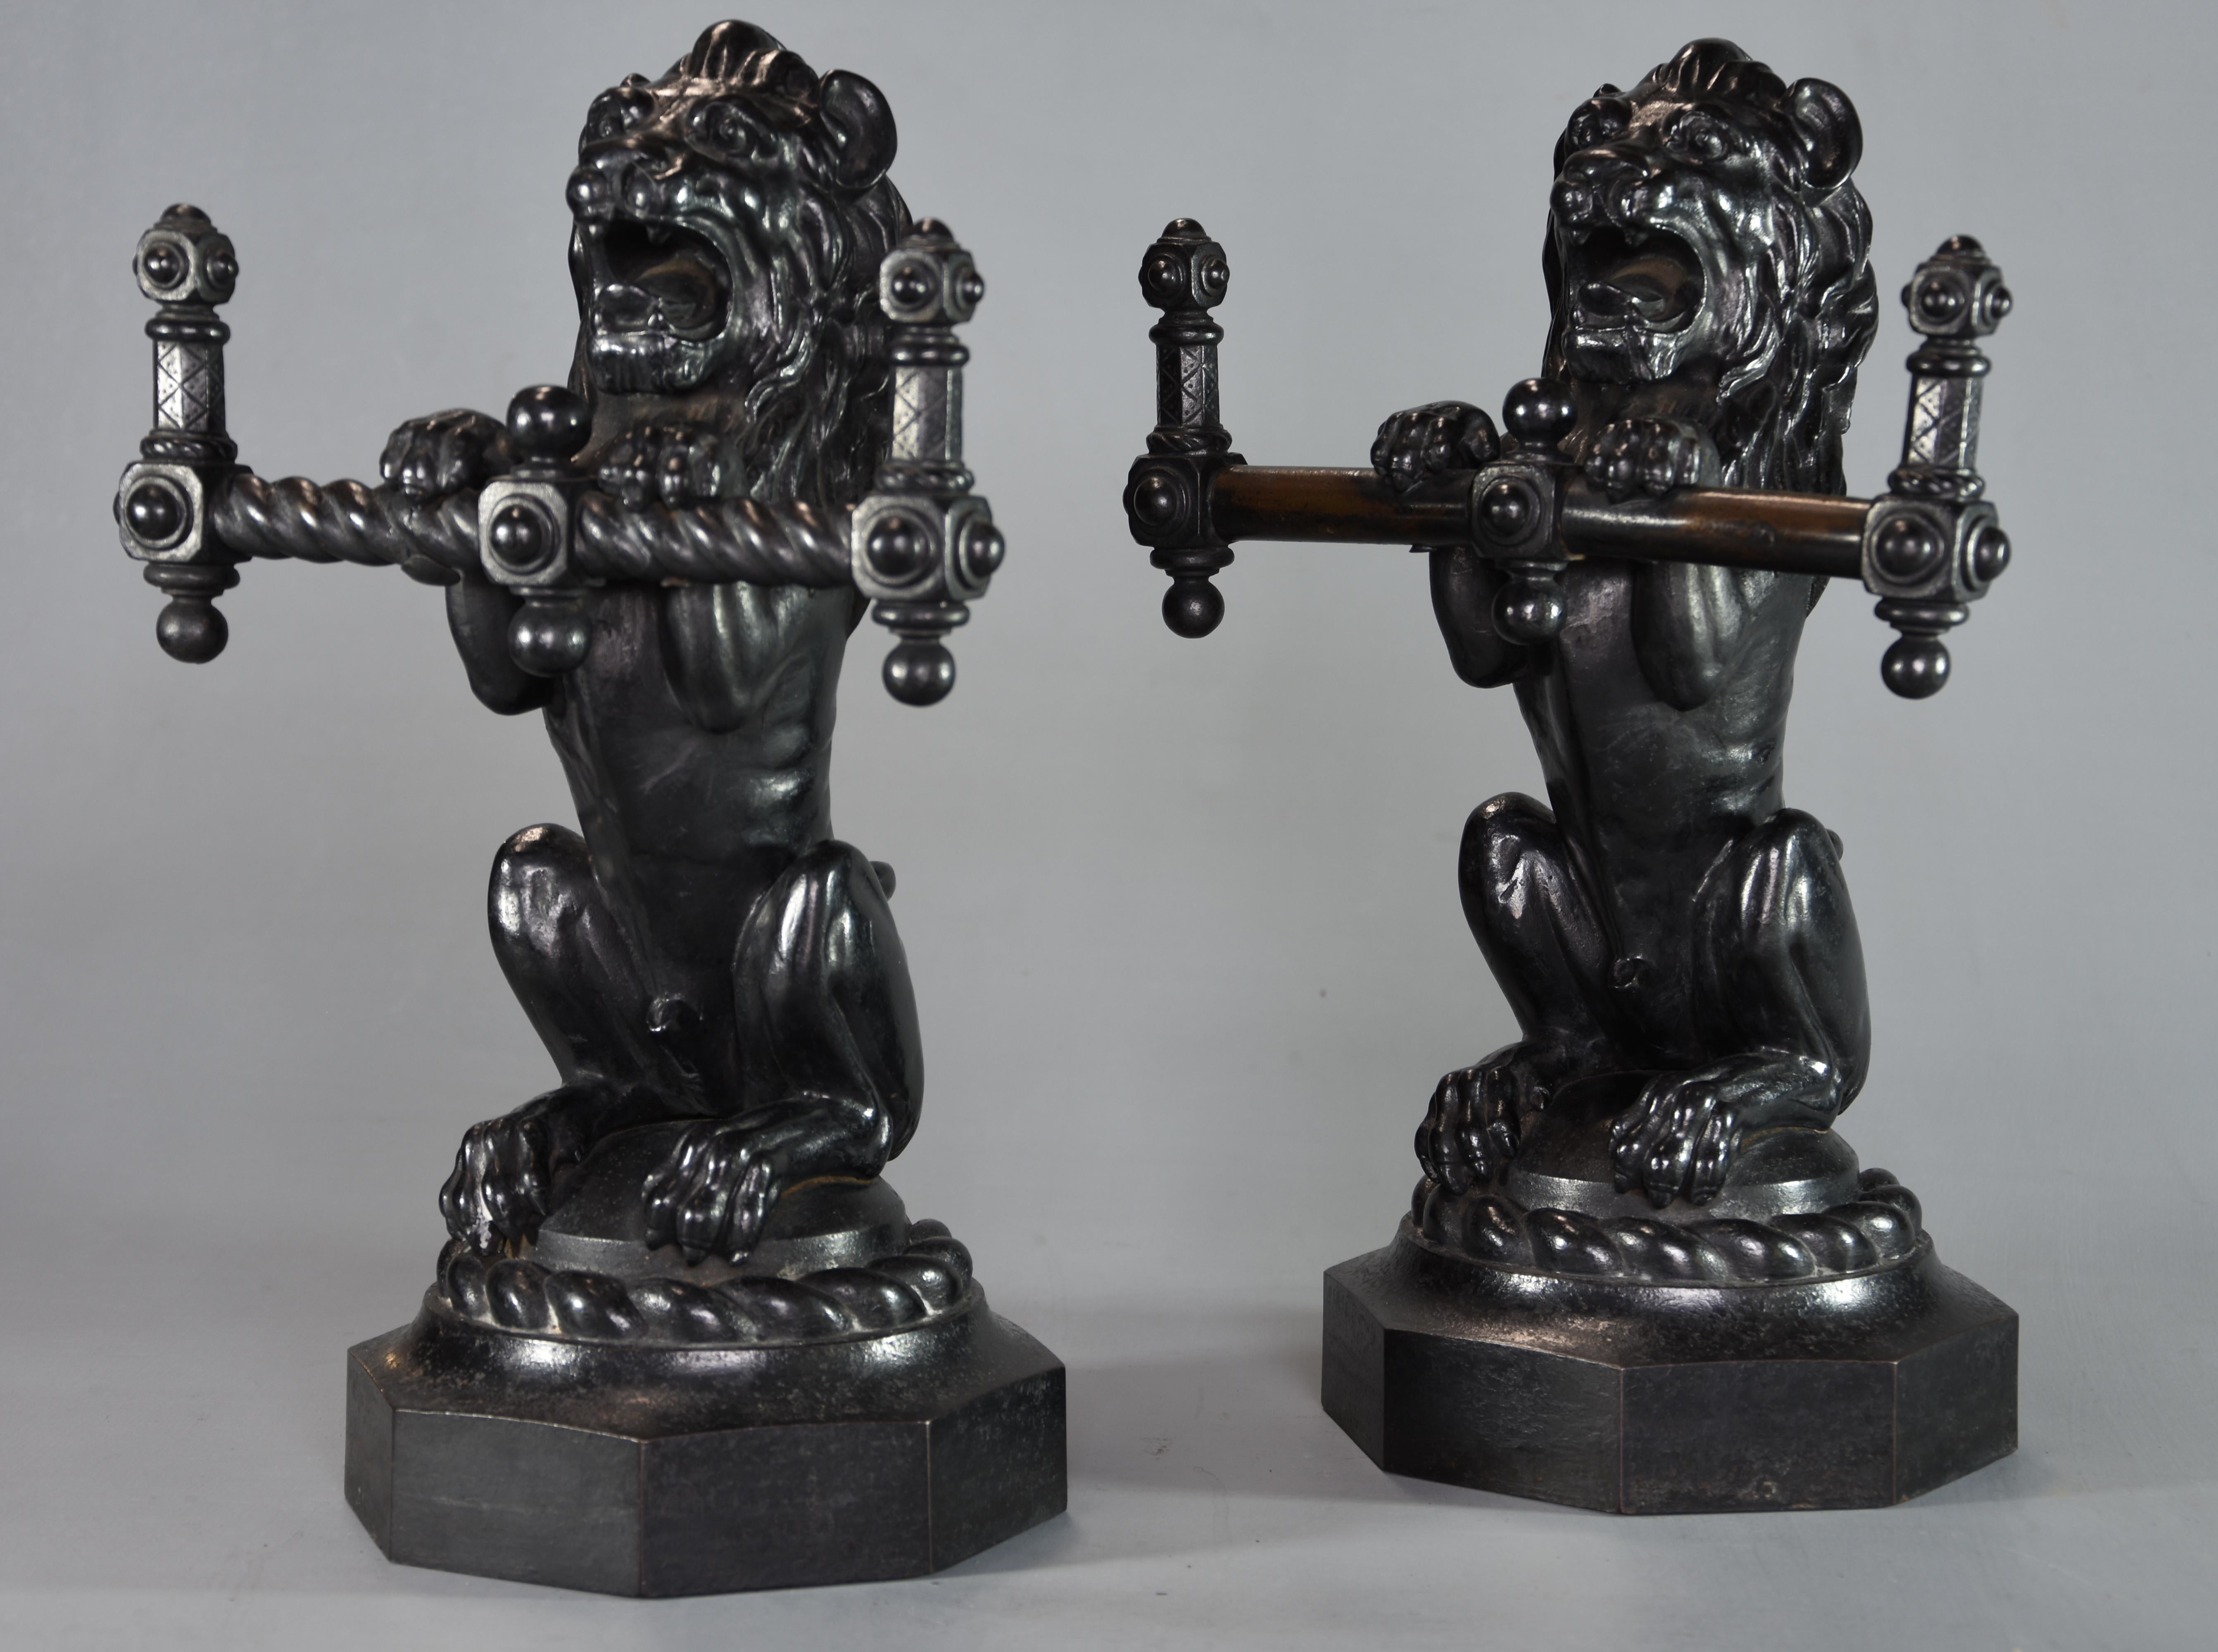 English Pair of Fine Quality Late 19th Century Cast Iron Fire Dogs in the Form of Lions